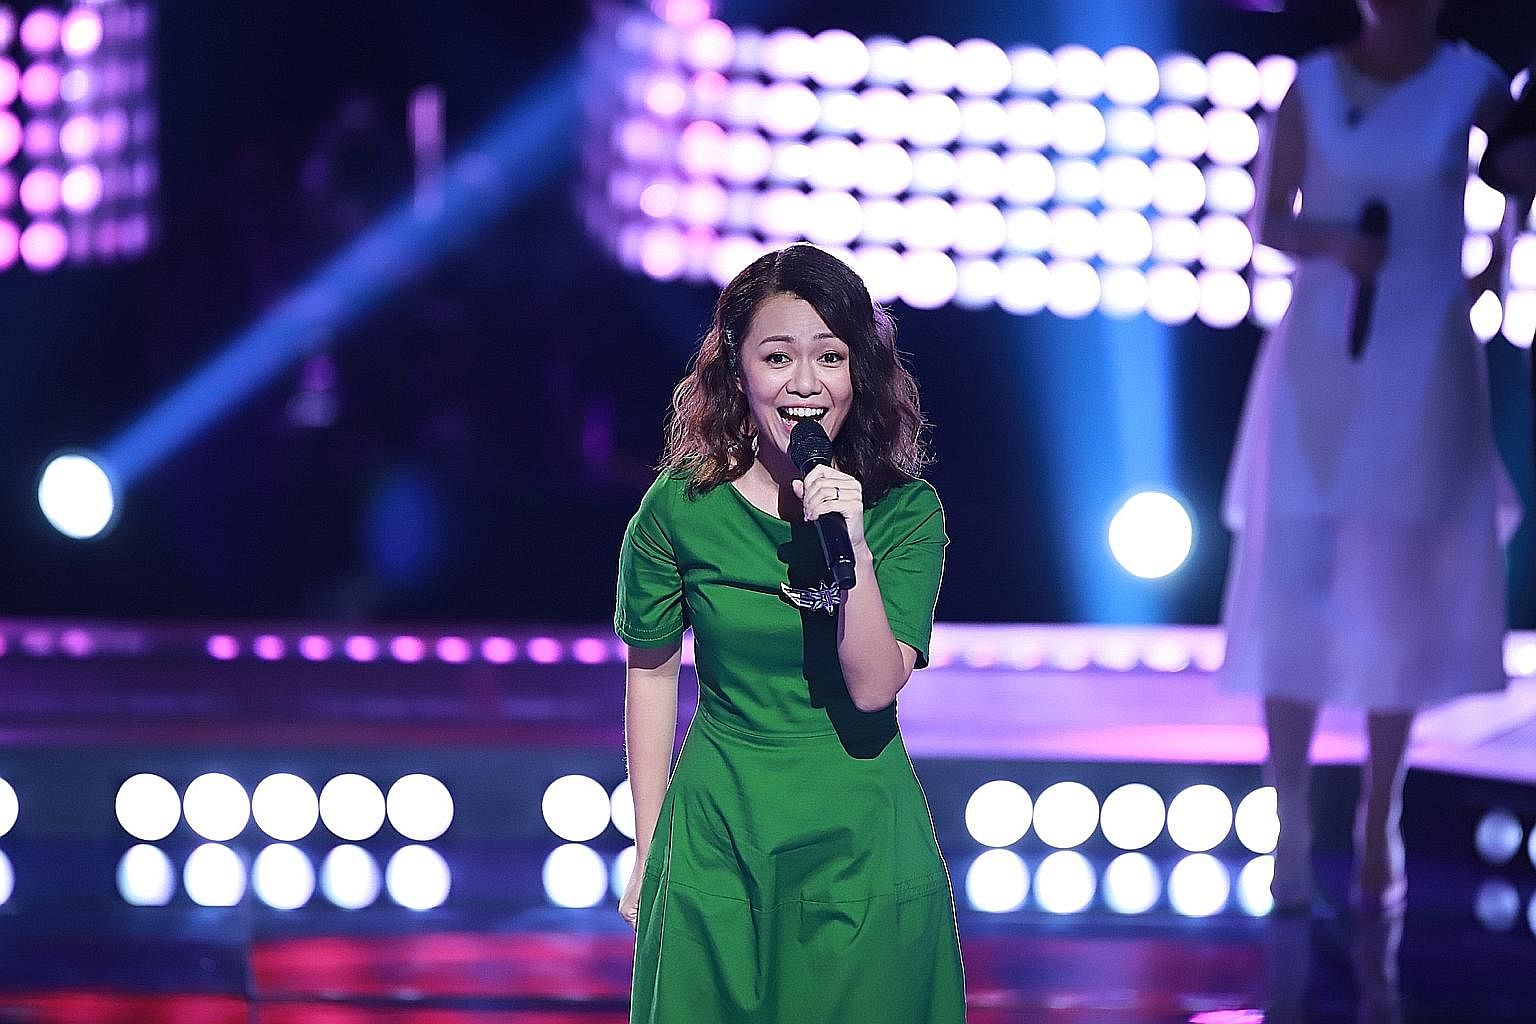 Joanna Dong performed I Want Your Love, a song picked by her mentor, Mandopop superstar Jay Chou.